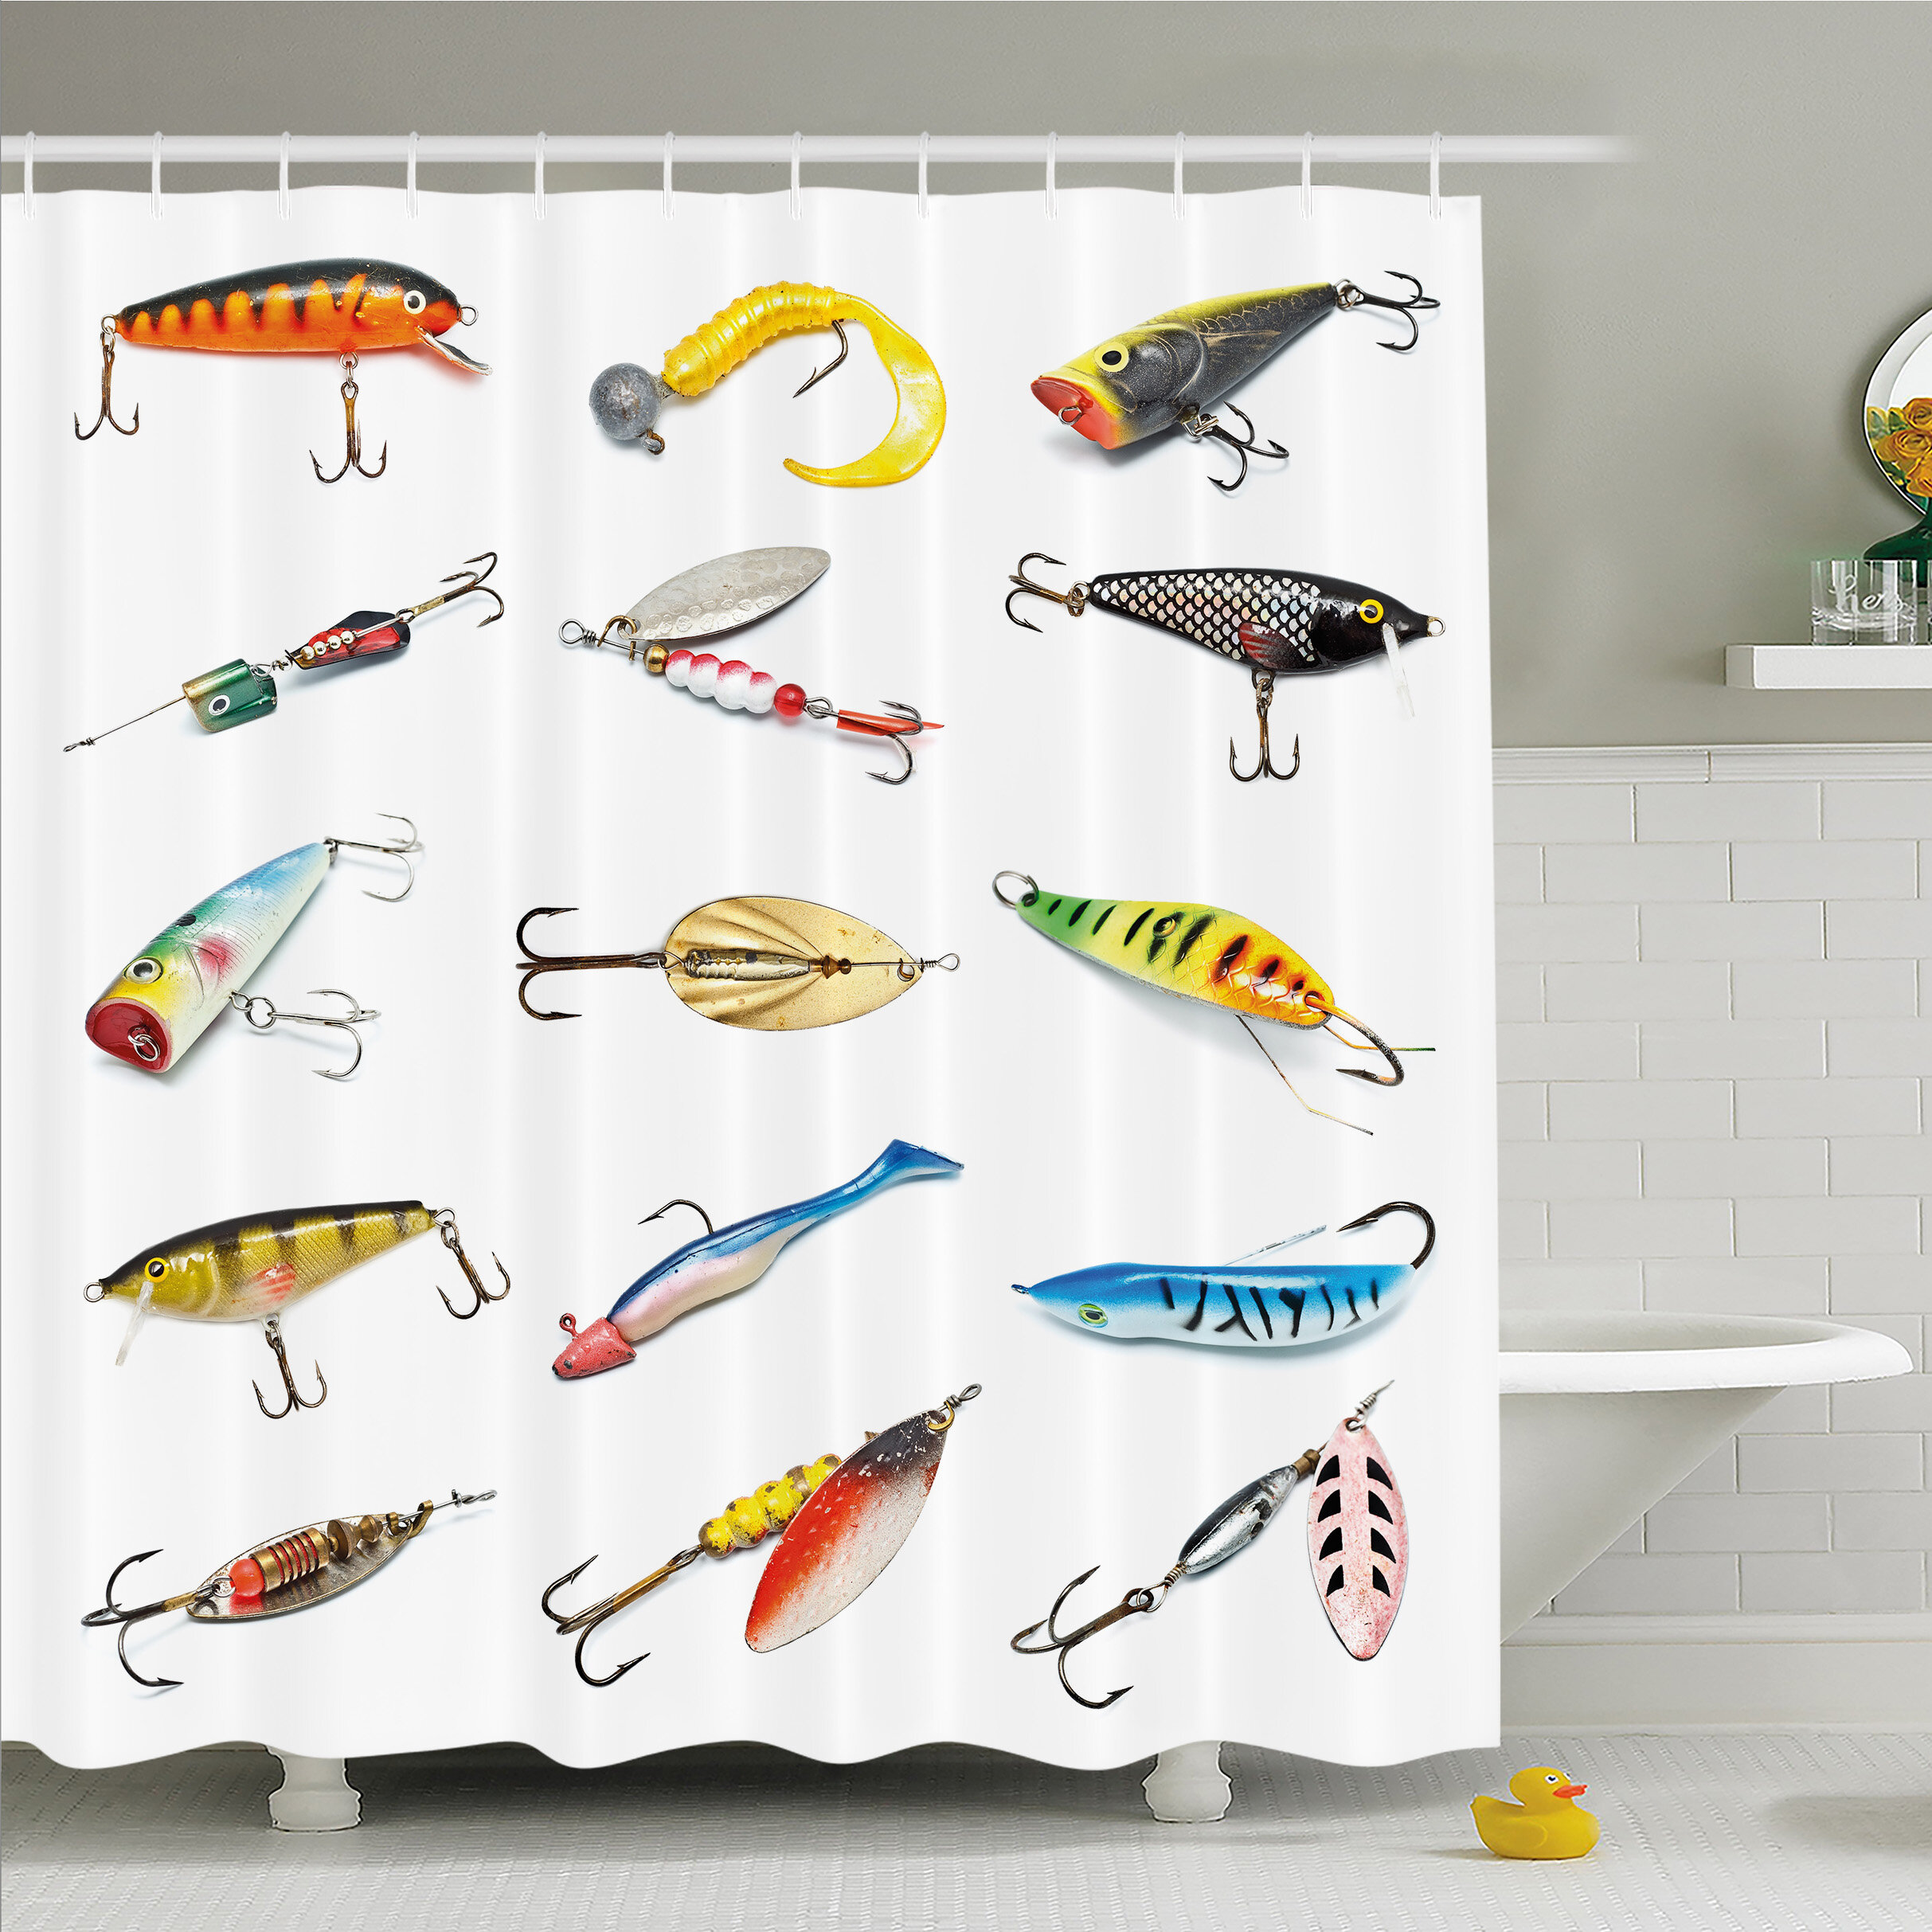 Several Fish Hook Equipment Objects Trolling Angling Netting Gathering Activity Shower Curtain Set East Urban Home Size: 69 H x 105 W